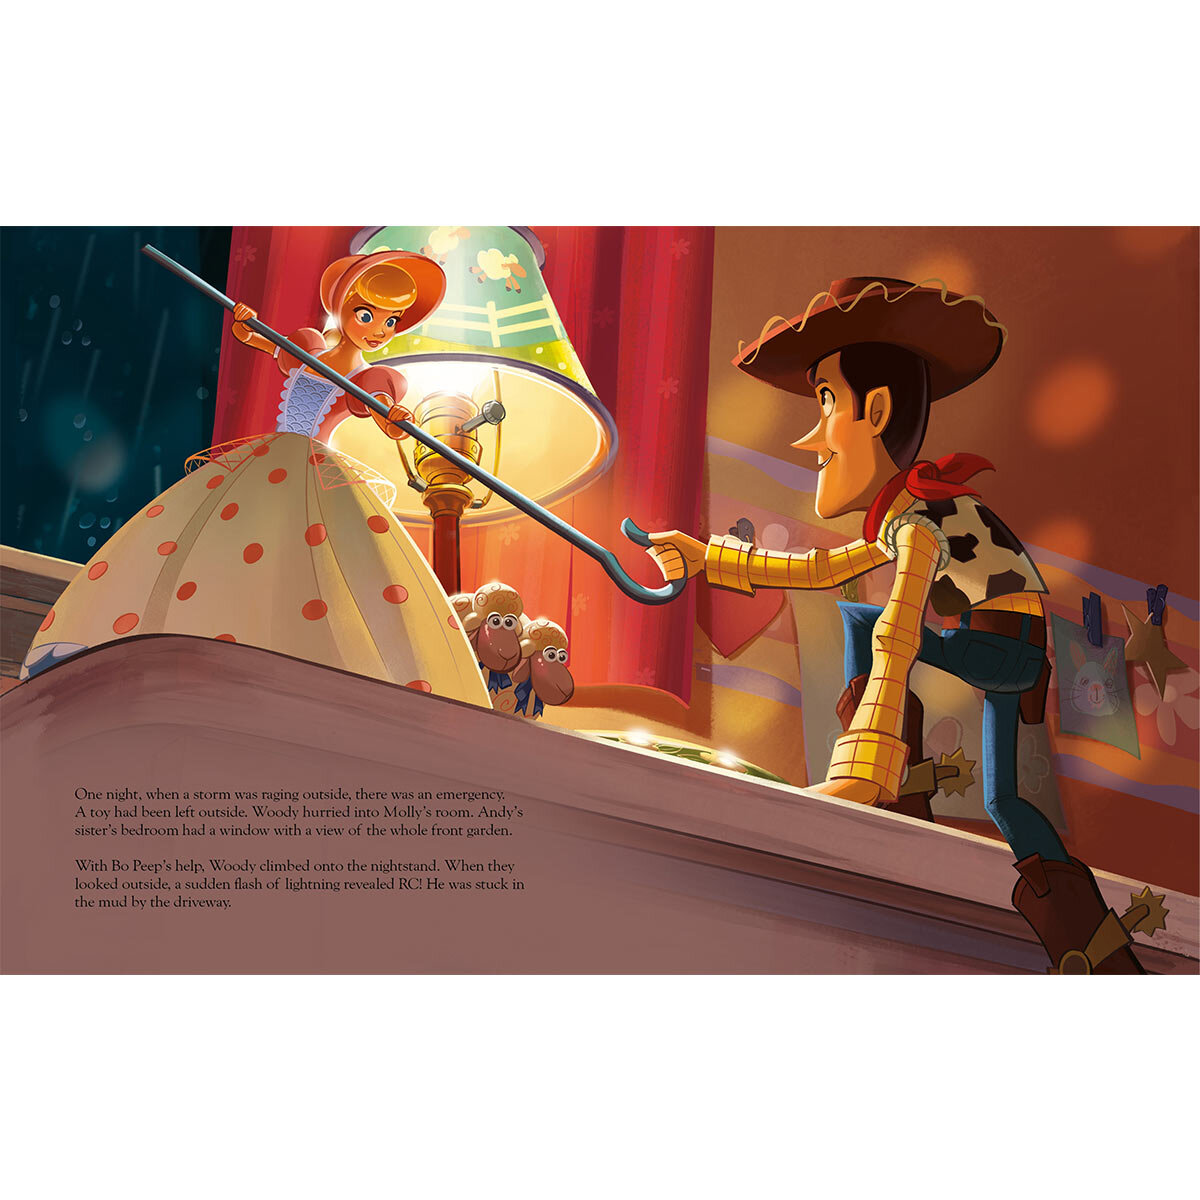 page spread of toy story